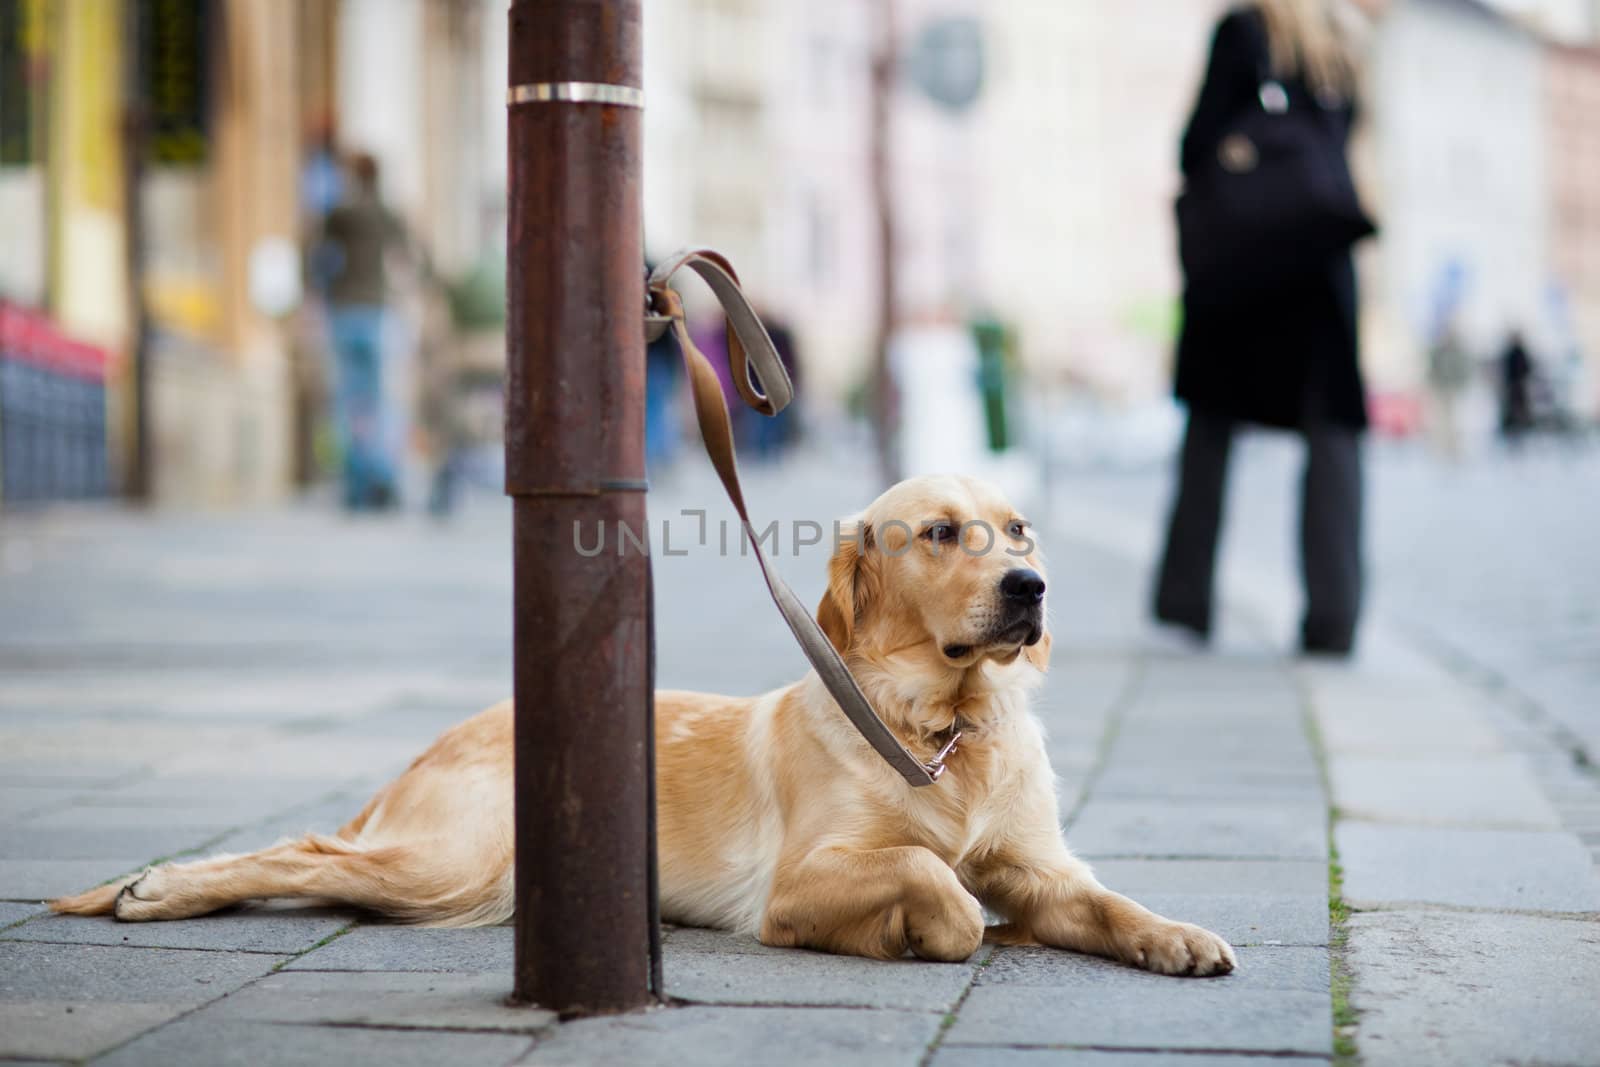 lonely cute dog waiting patiently for his master on a city stree by viktor_cap